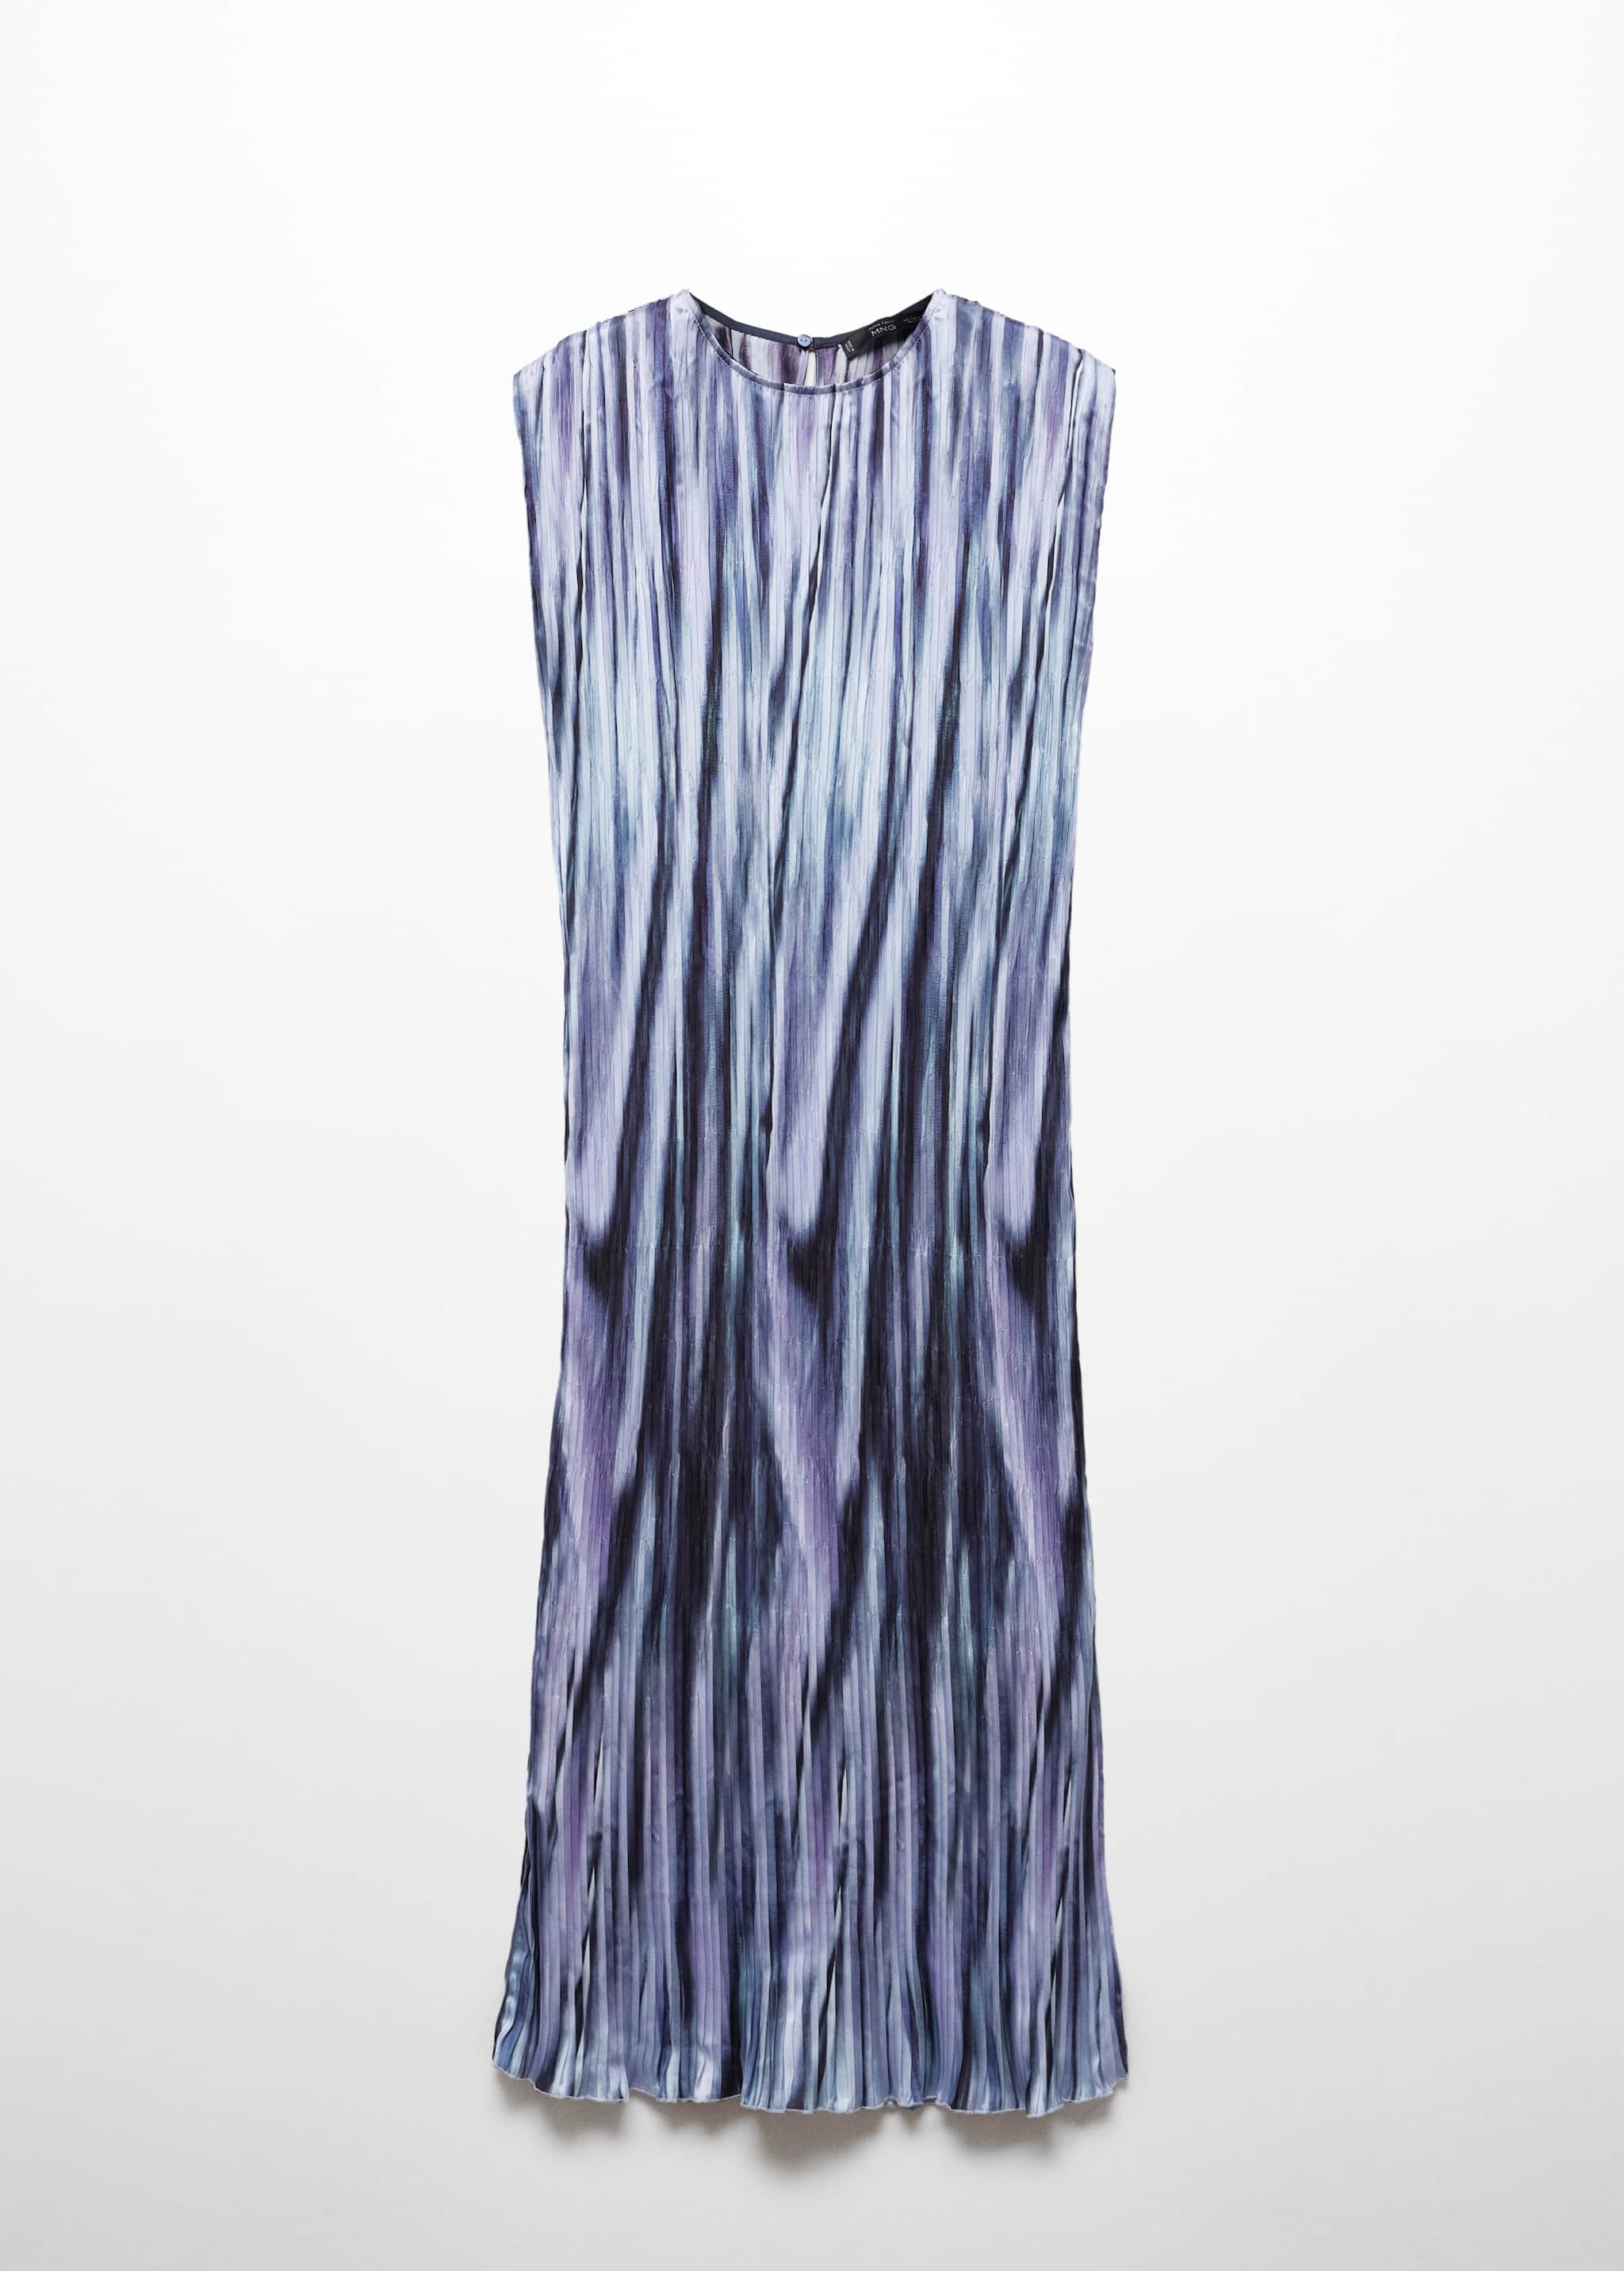 Tie-dye pleated dress - Article without model